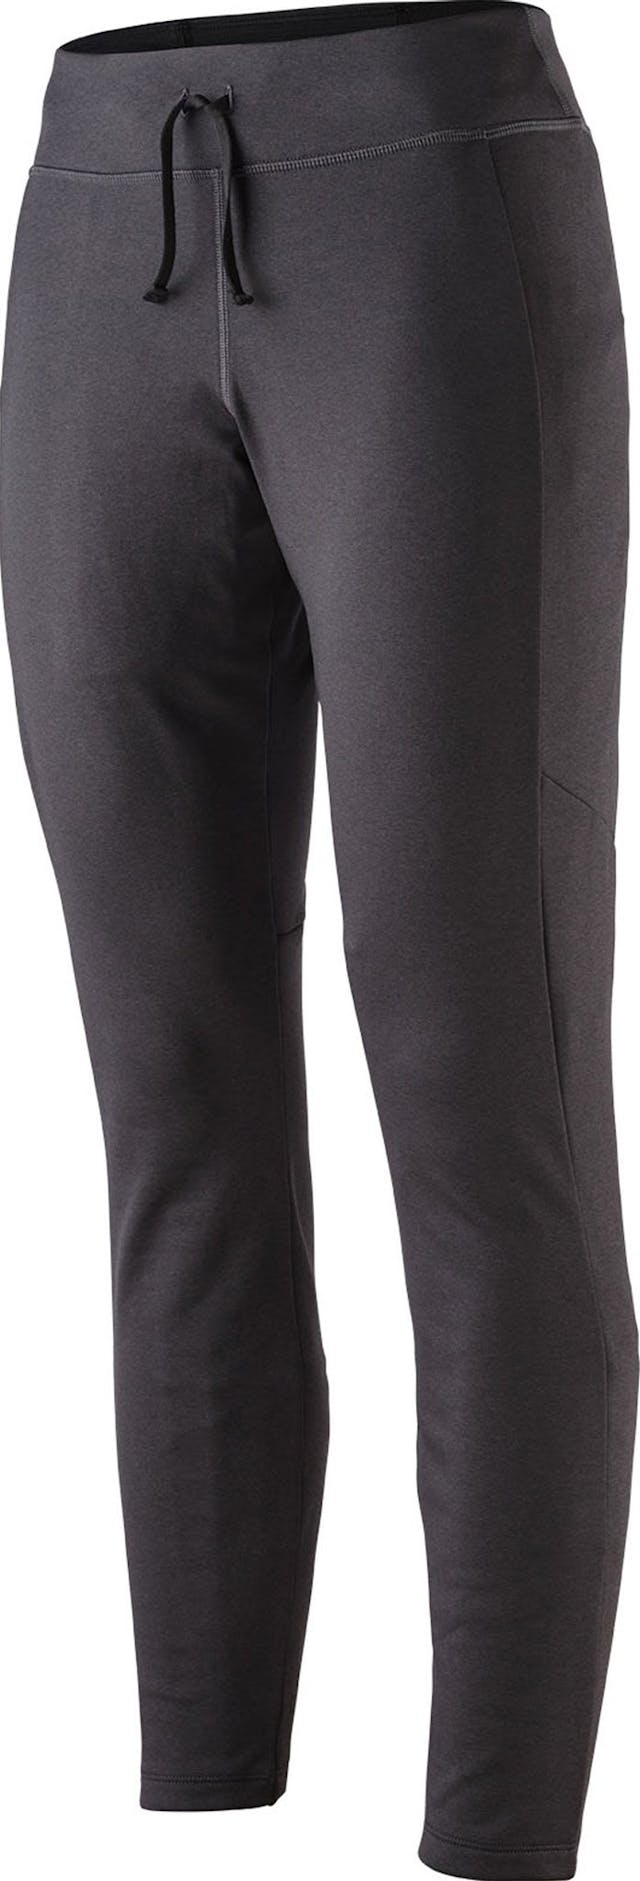 Product image for R1 Daily Baselayer Bottoms - Women's